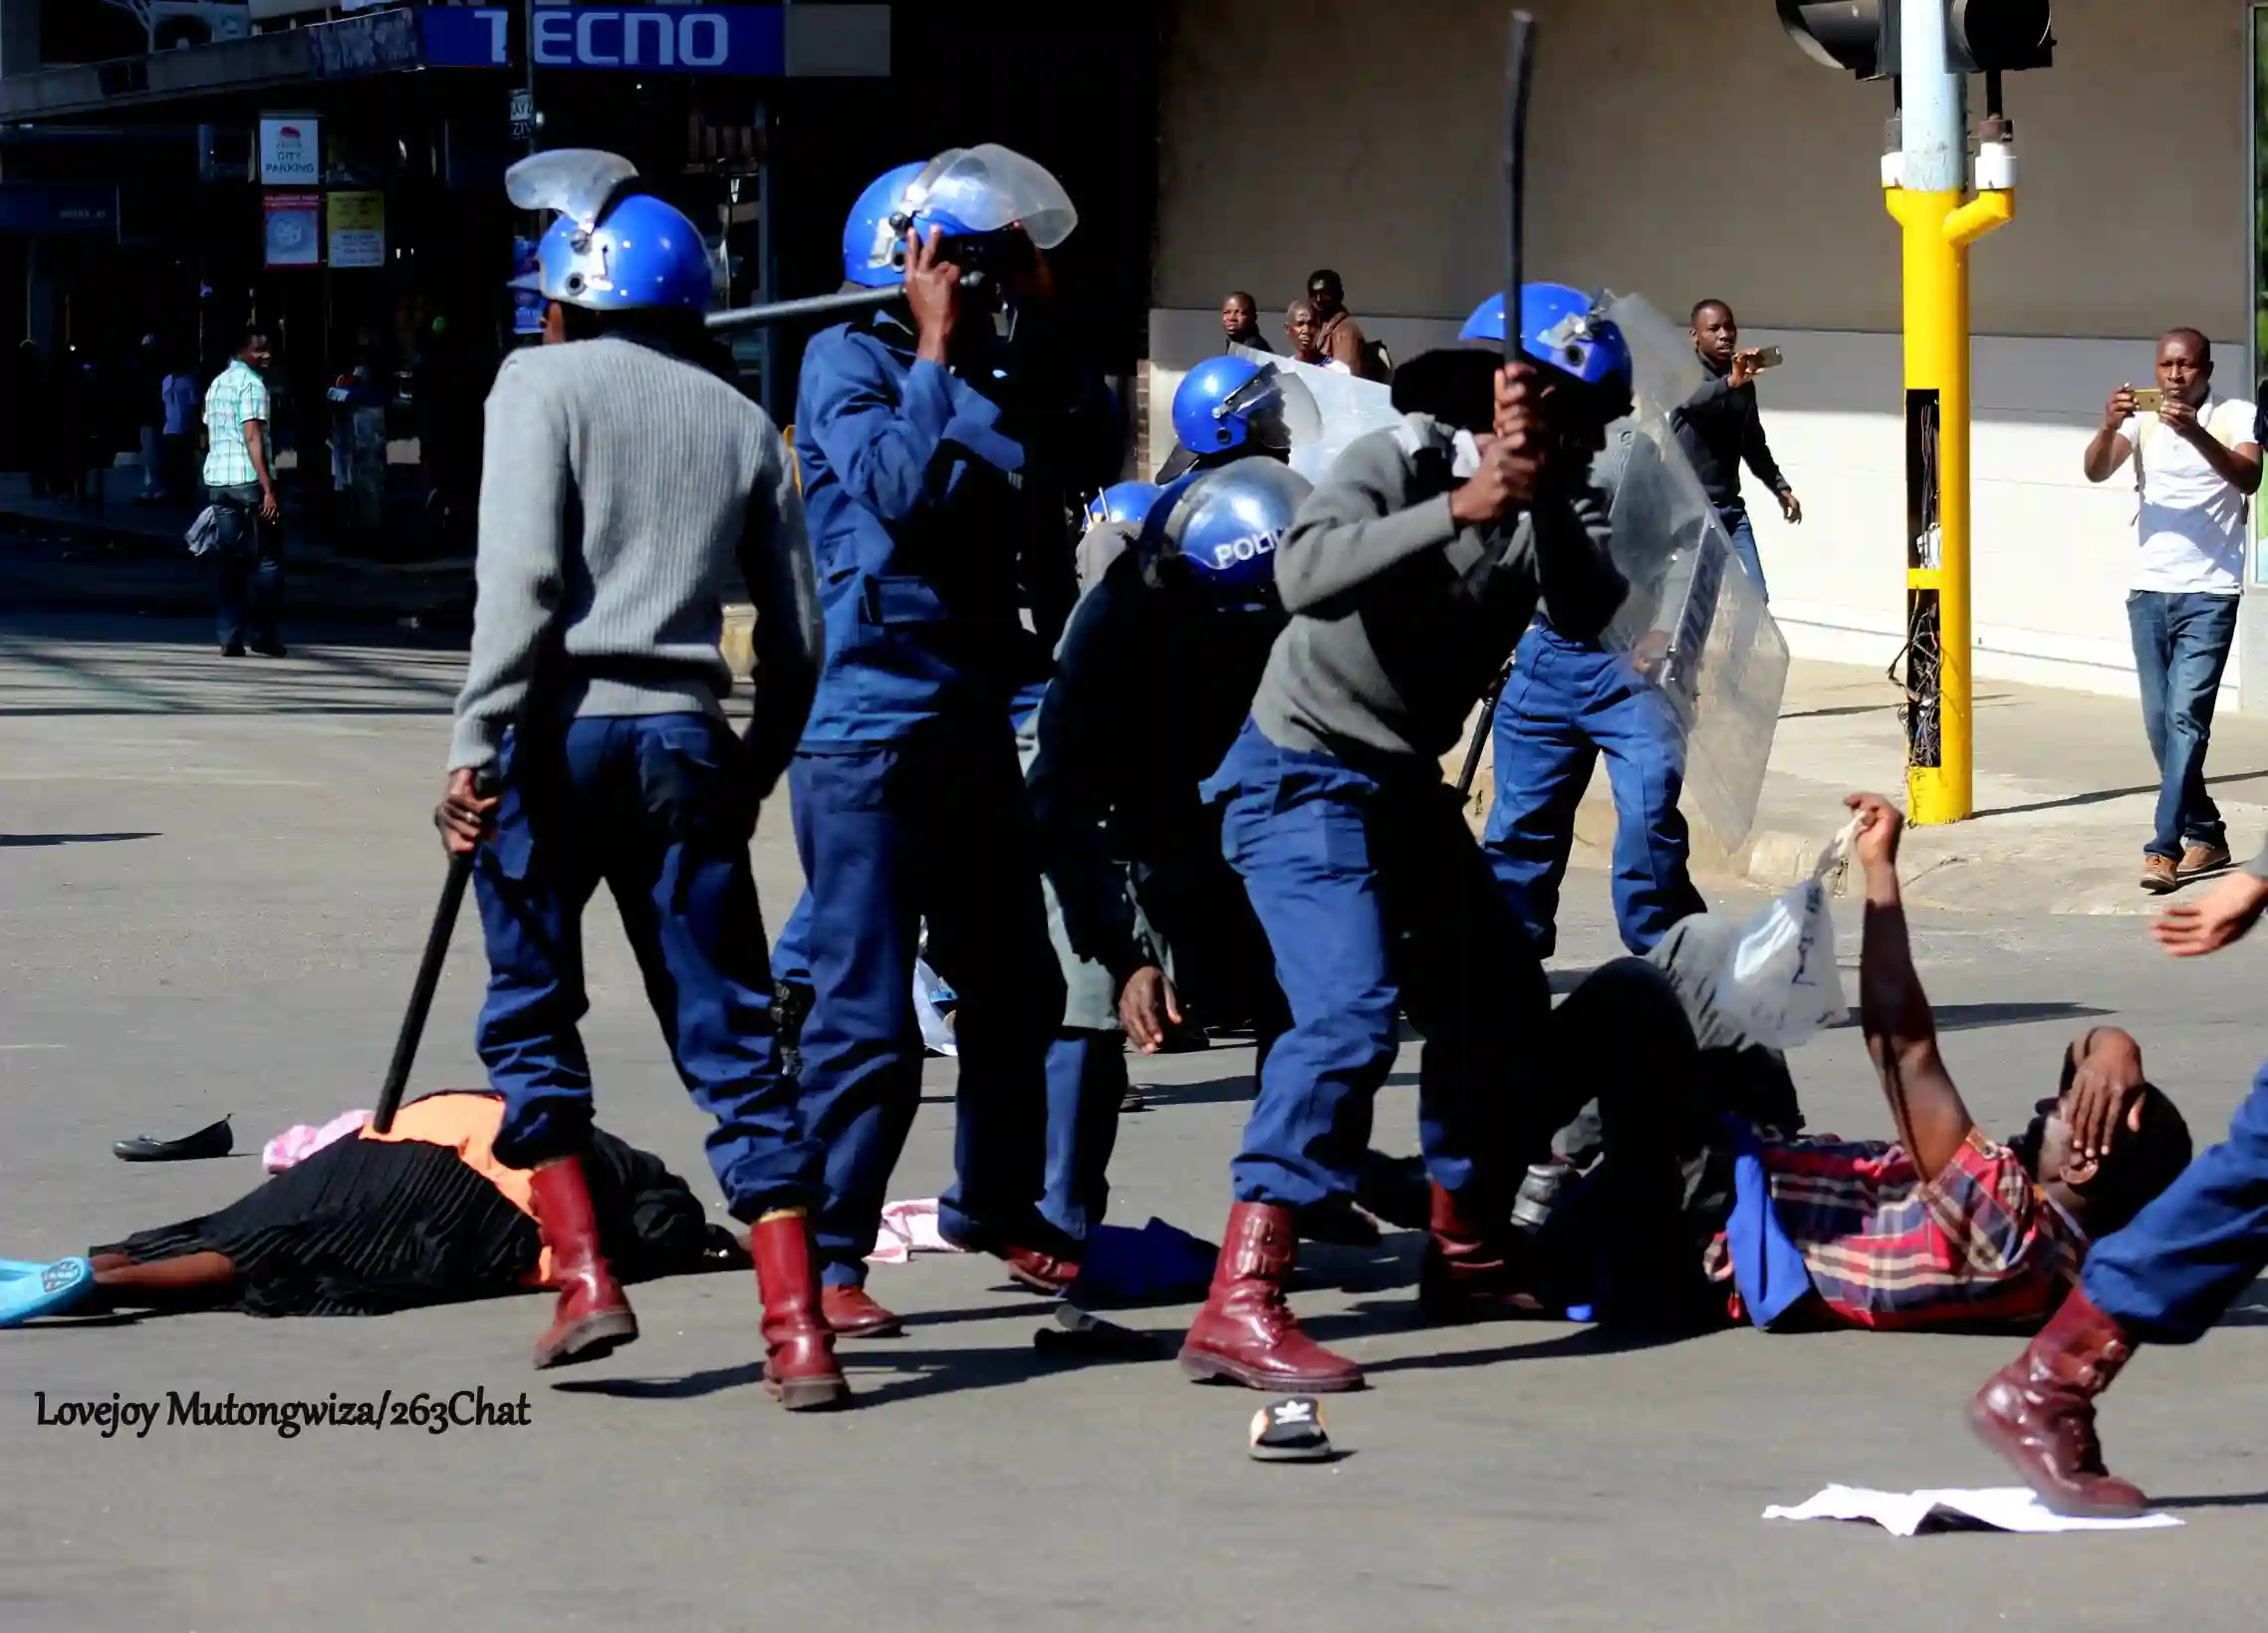 Govt Deployed Soldiers, Green Bombers In Police Uniform To Disperse Protestors - MDC